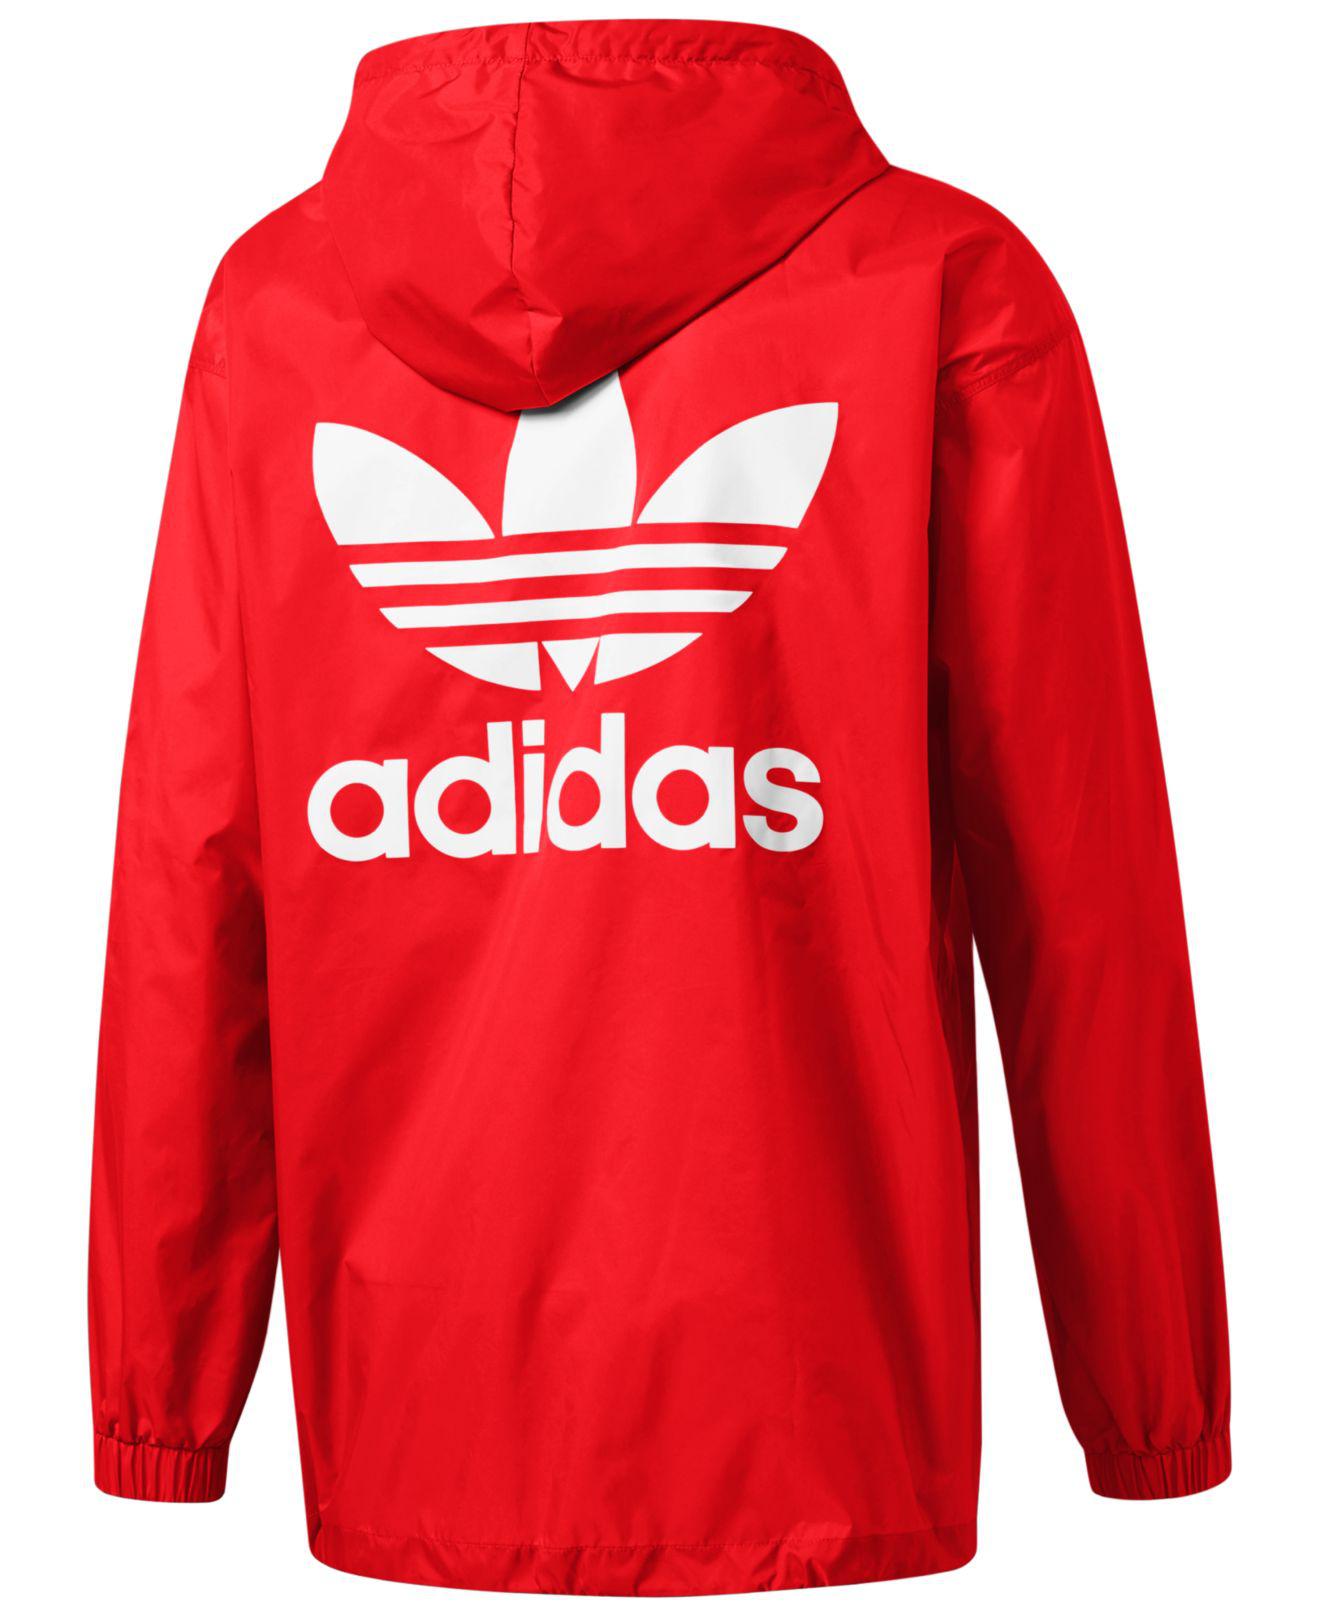 adidas Synthetic Men's Hooded Poncho 